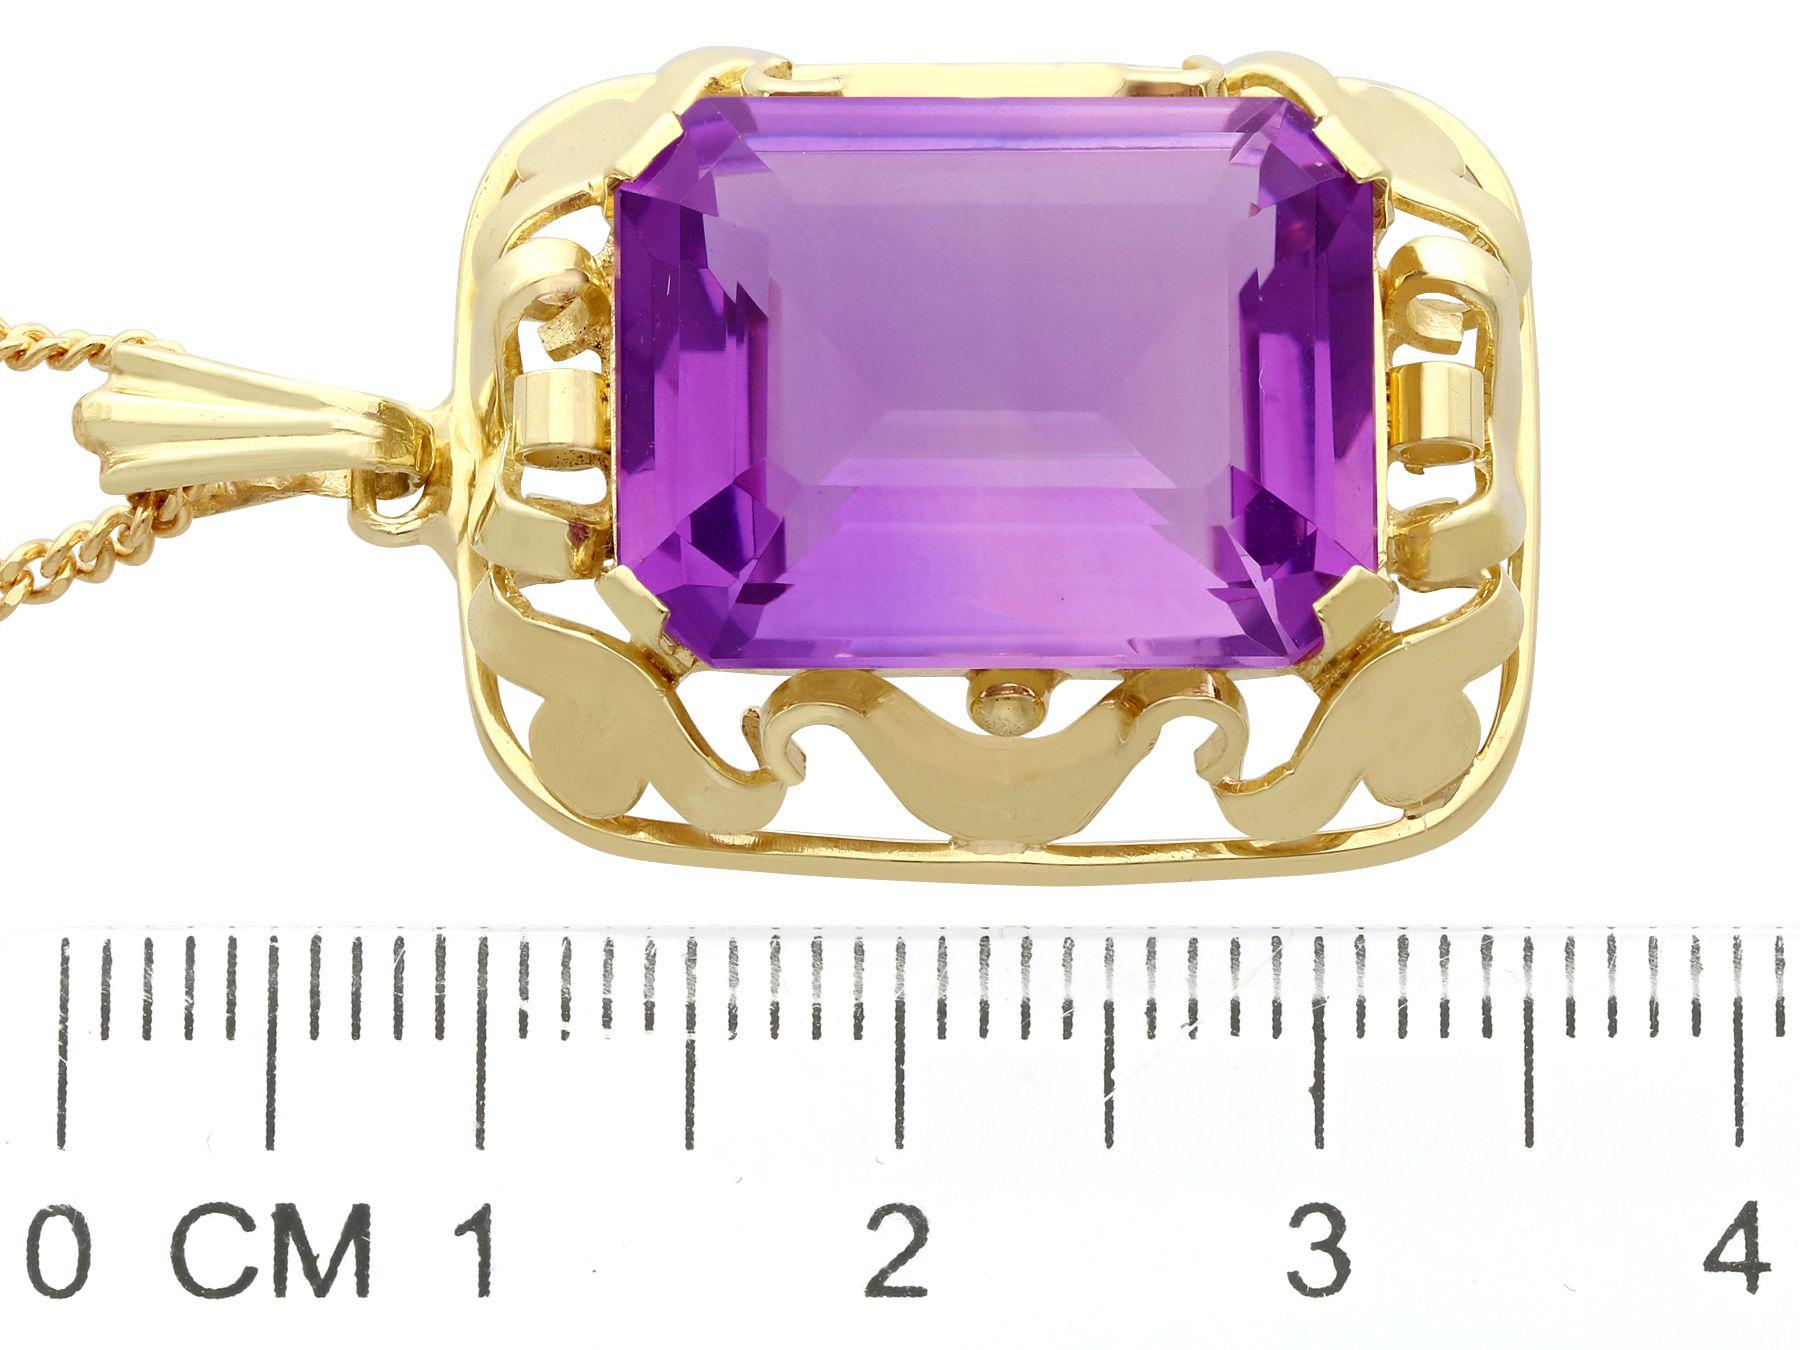 Vintage 1950s 15.41 Carat Amethyst and Yellow Gold Pendant For Sale 1